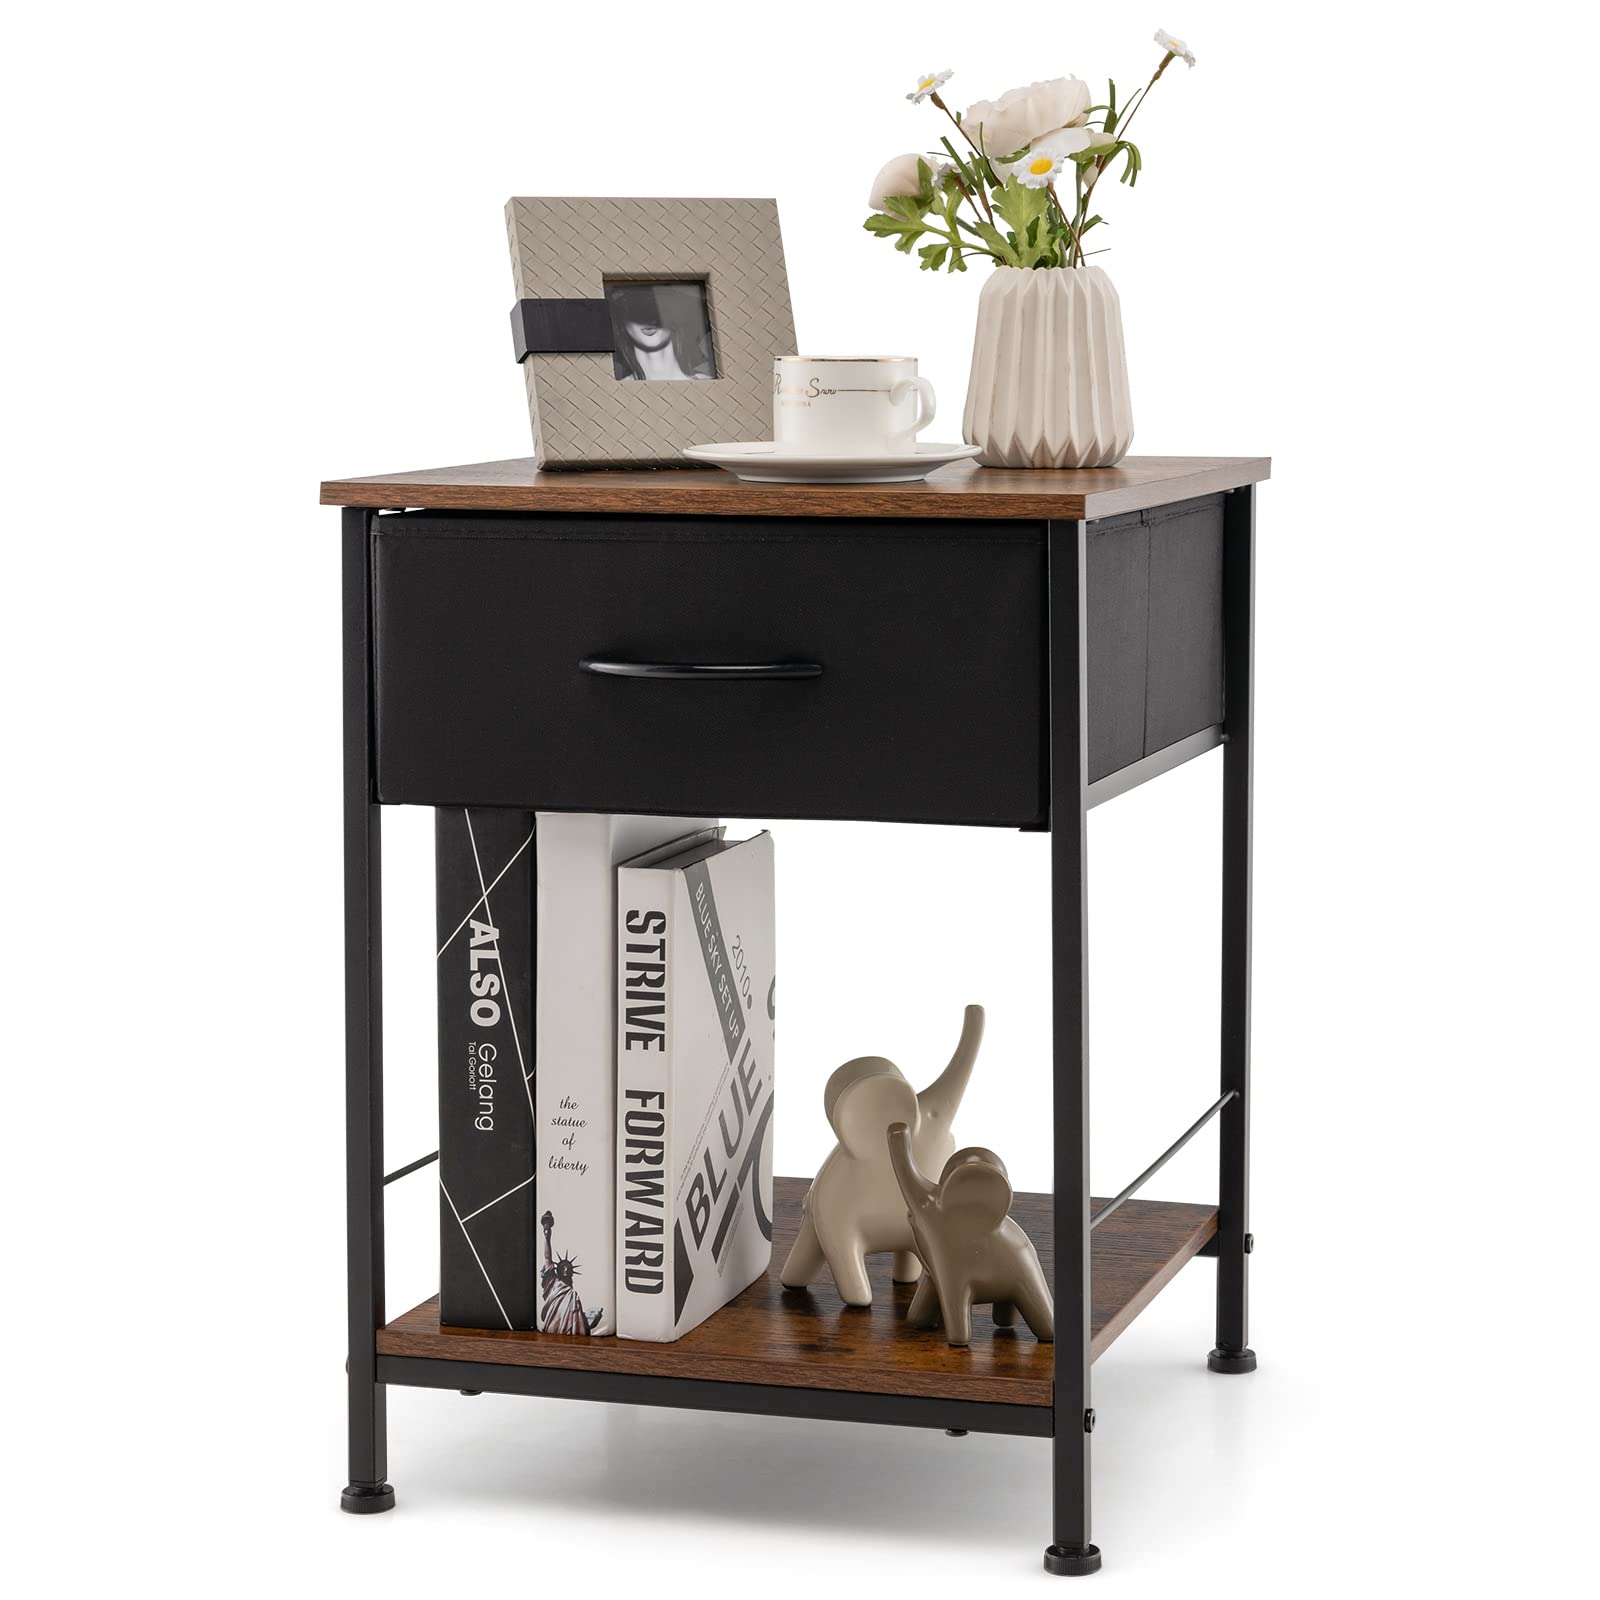 Giantex Nightstand, Bedside Table w/Removable Fabric Drawers and Open Storage Shelf